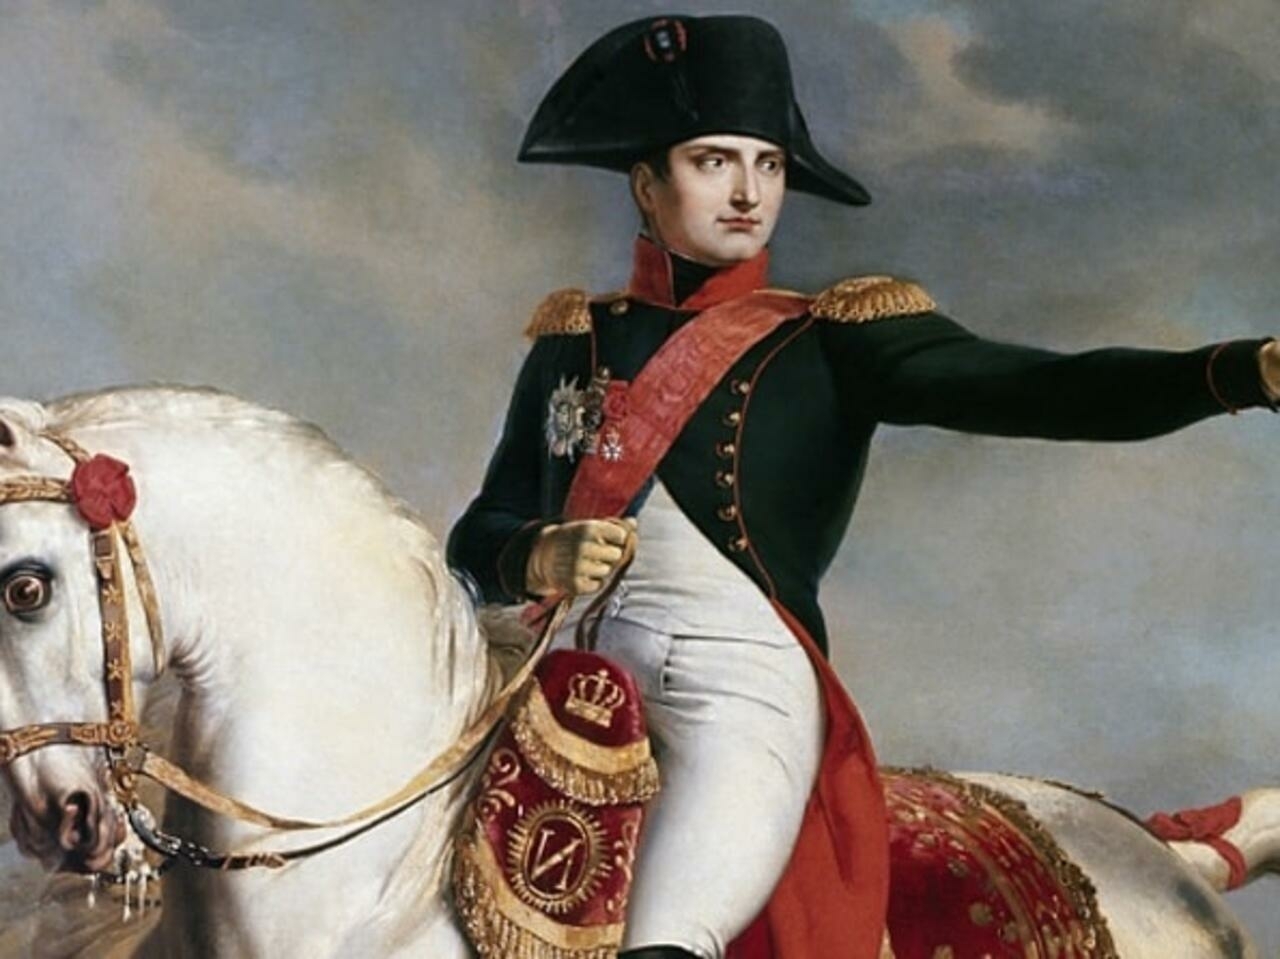 Absurd Historical Events - When Napoleon returned to France from his exile